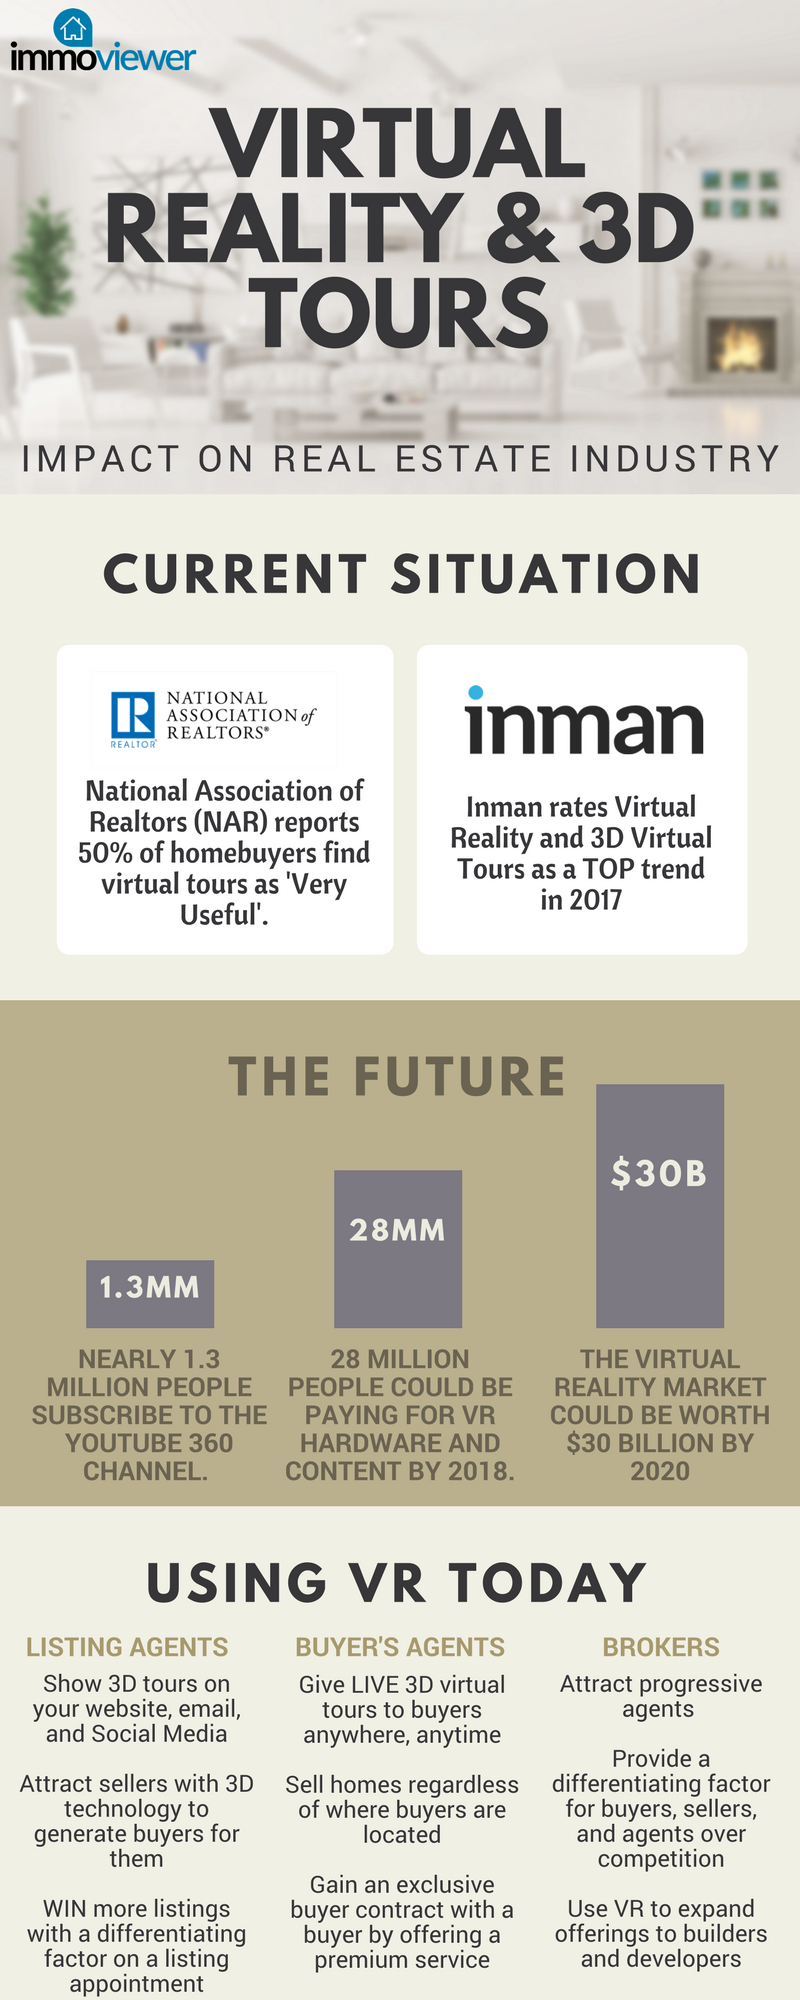 virtual reality in the real estate industry infographic